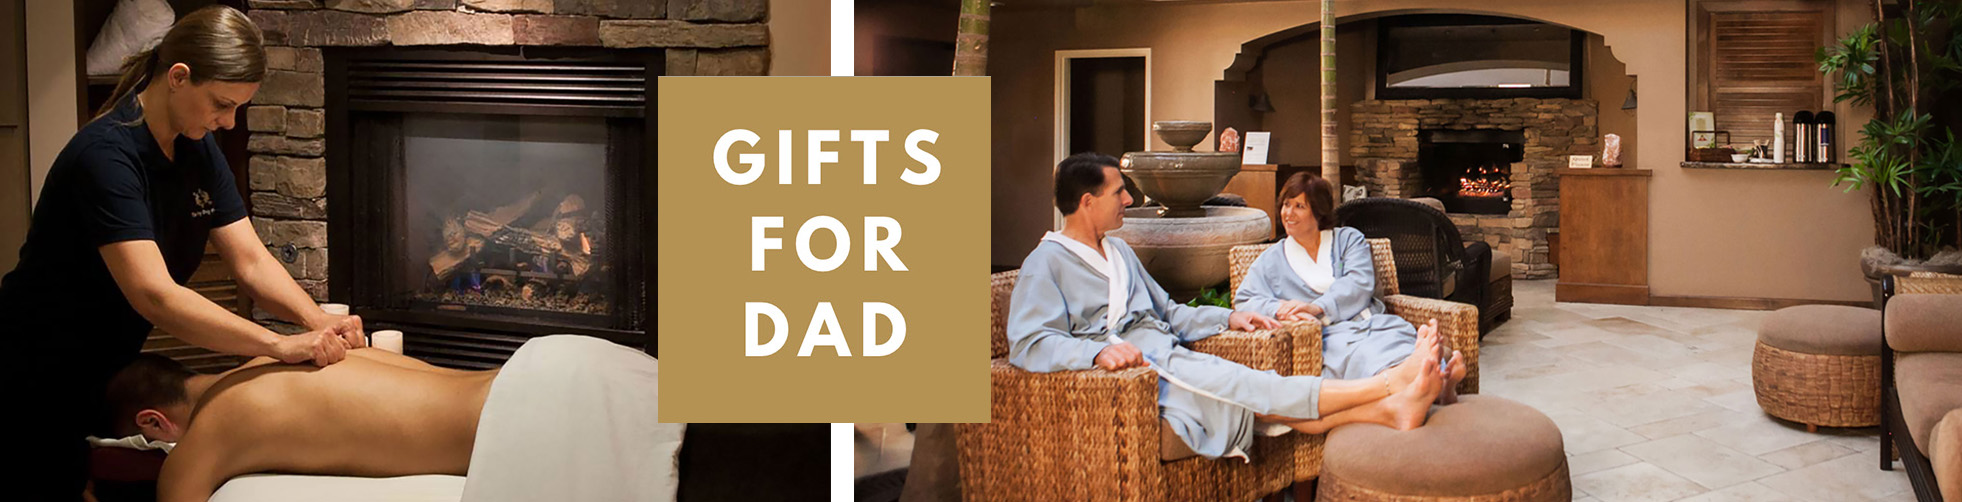 Gifts for Dad Fathers Day